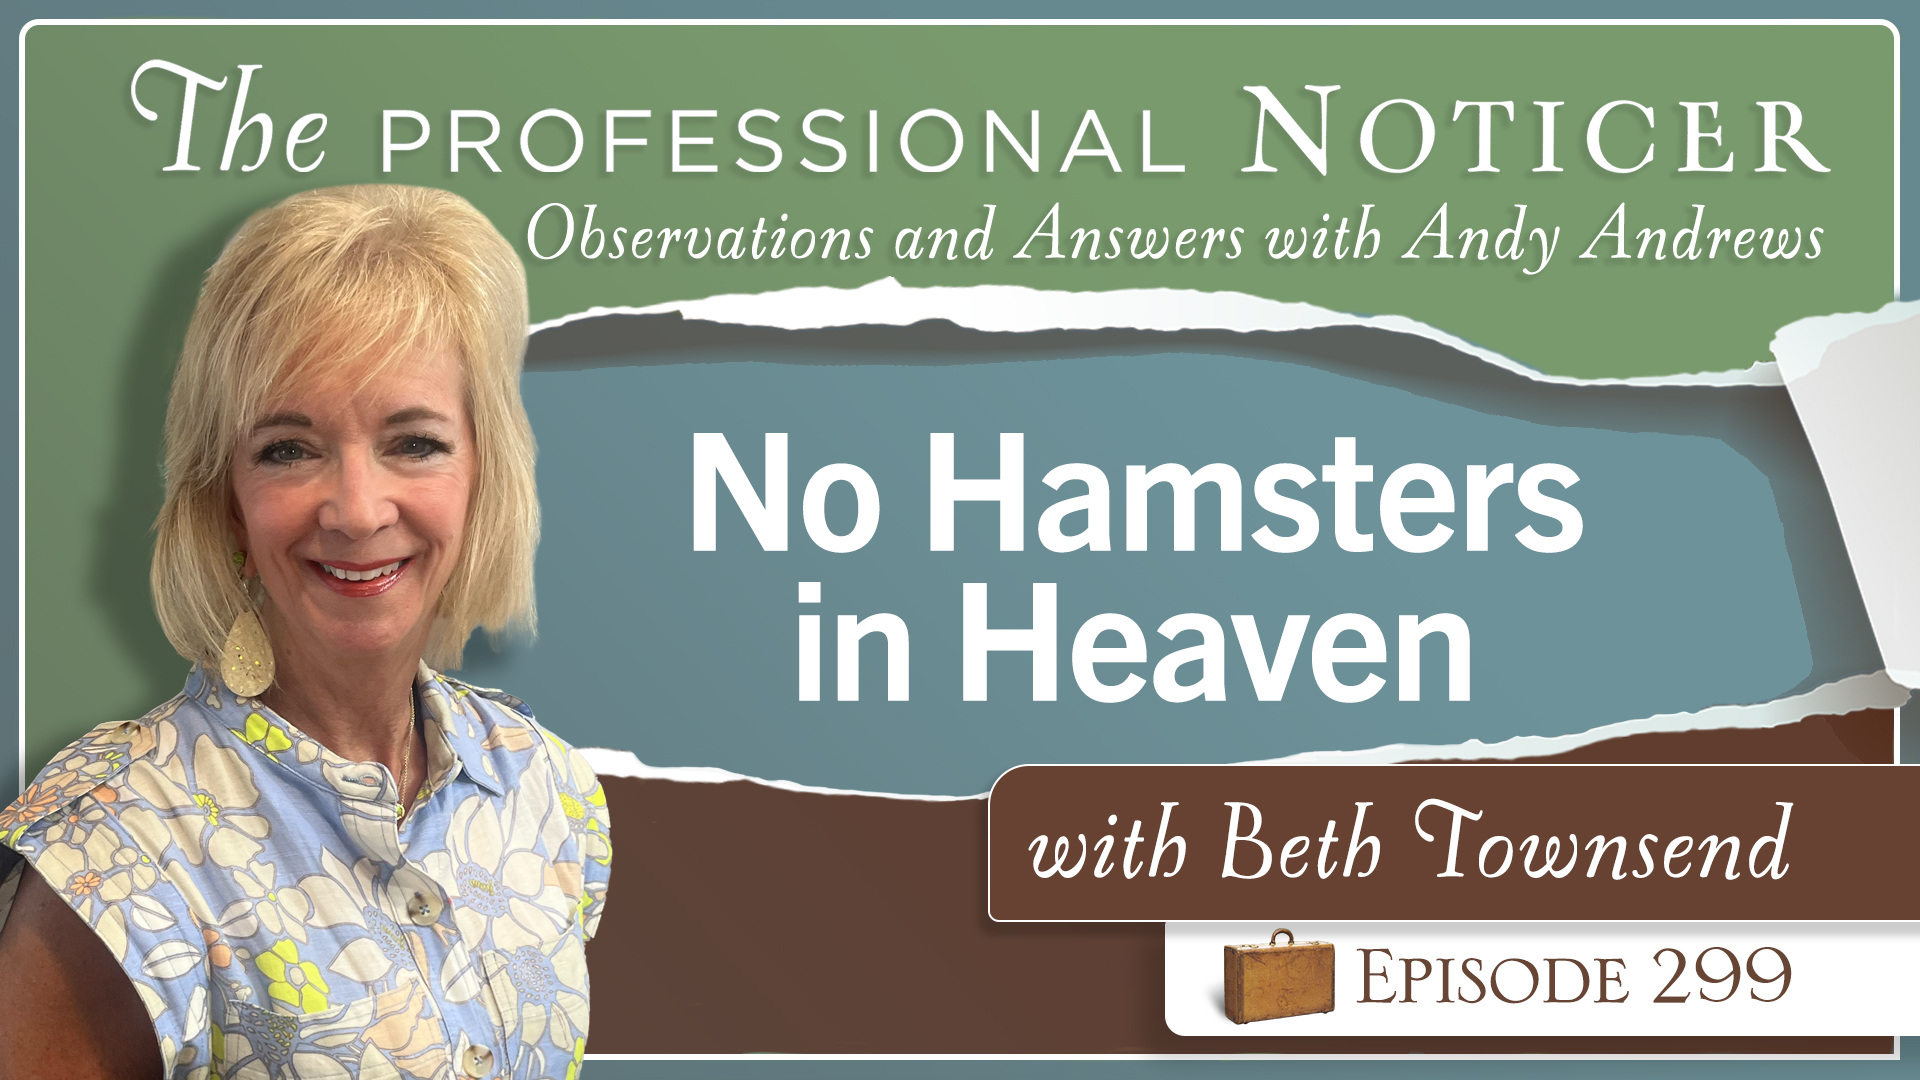 No Hamsters in Heaven with Beth Townsend